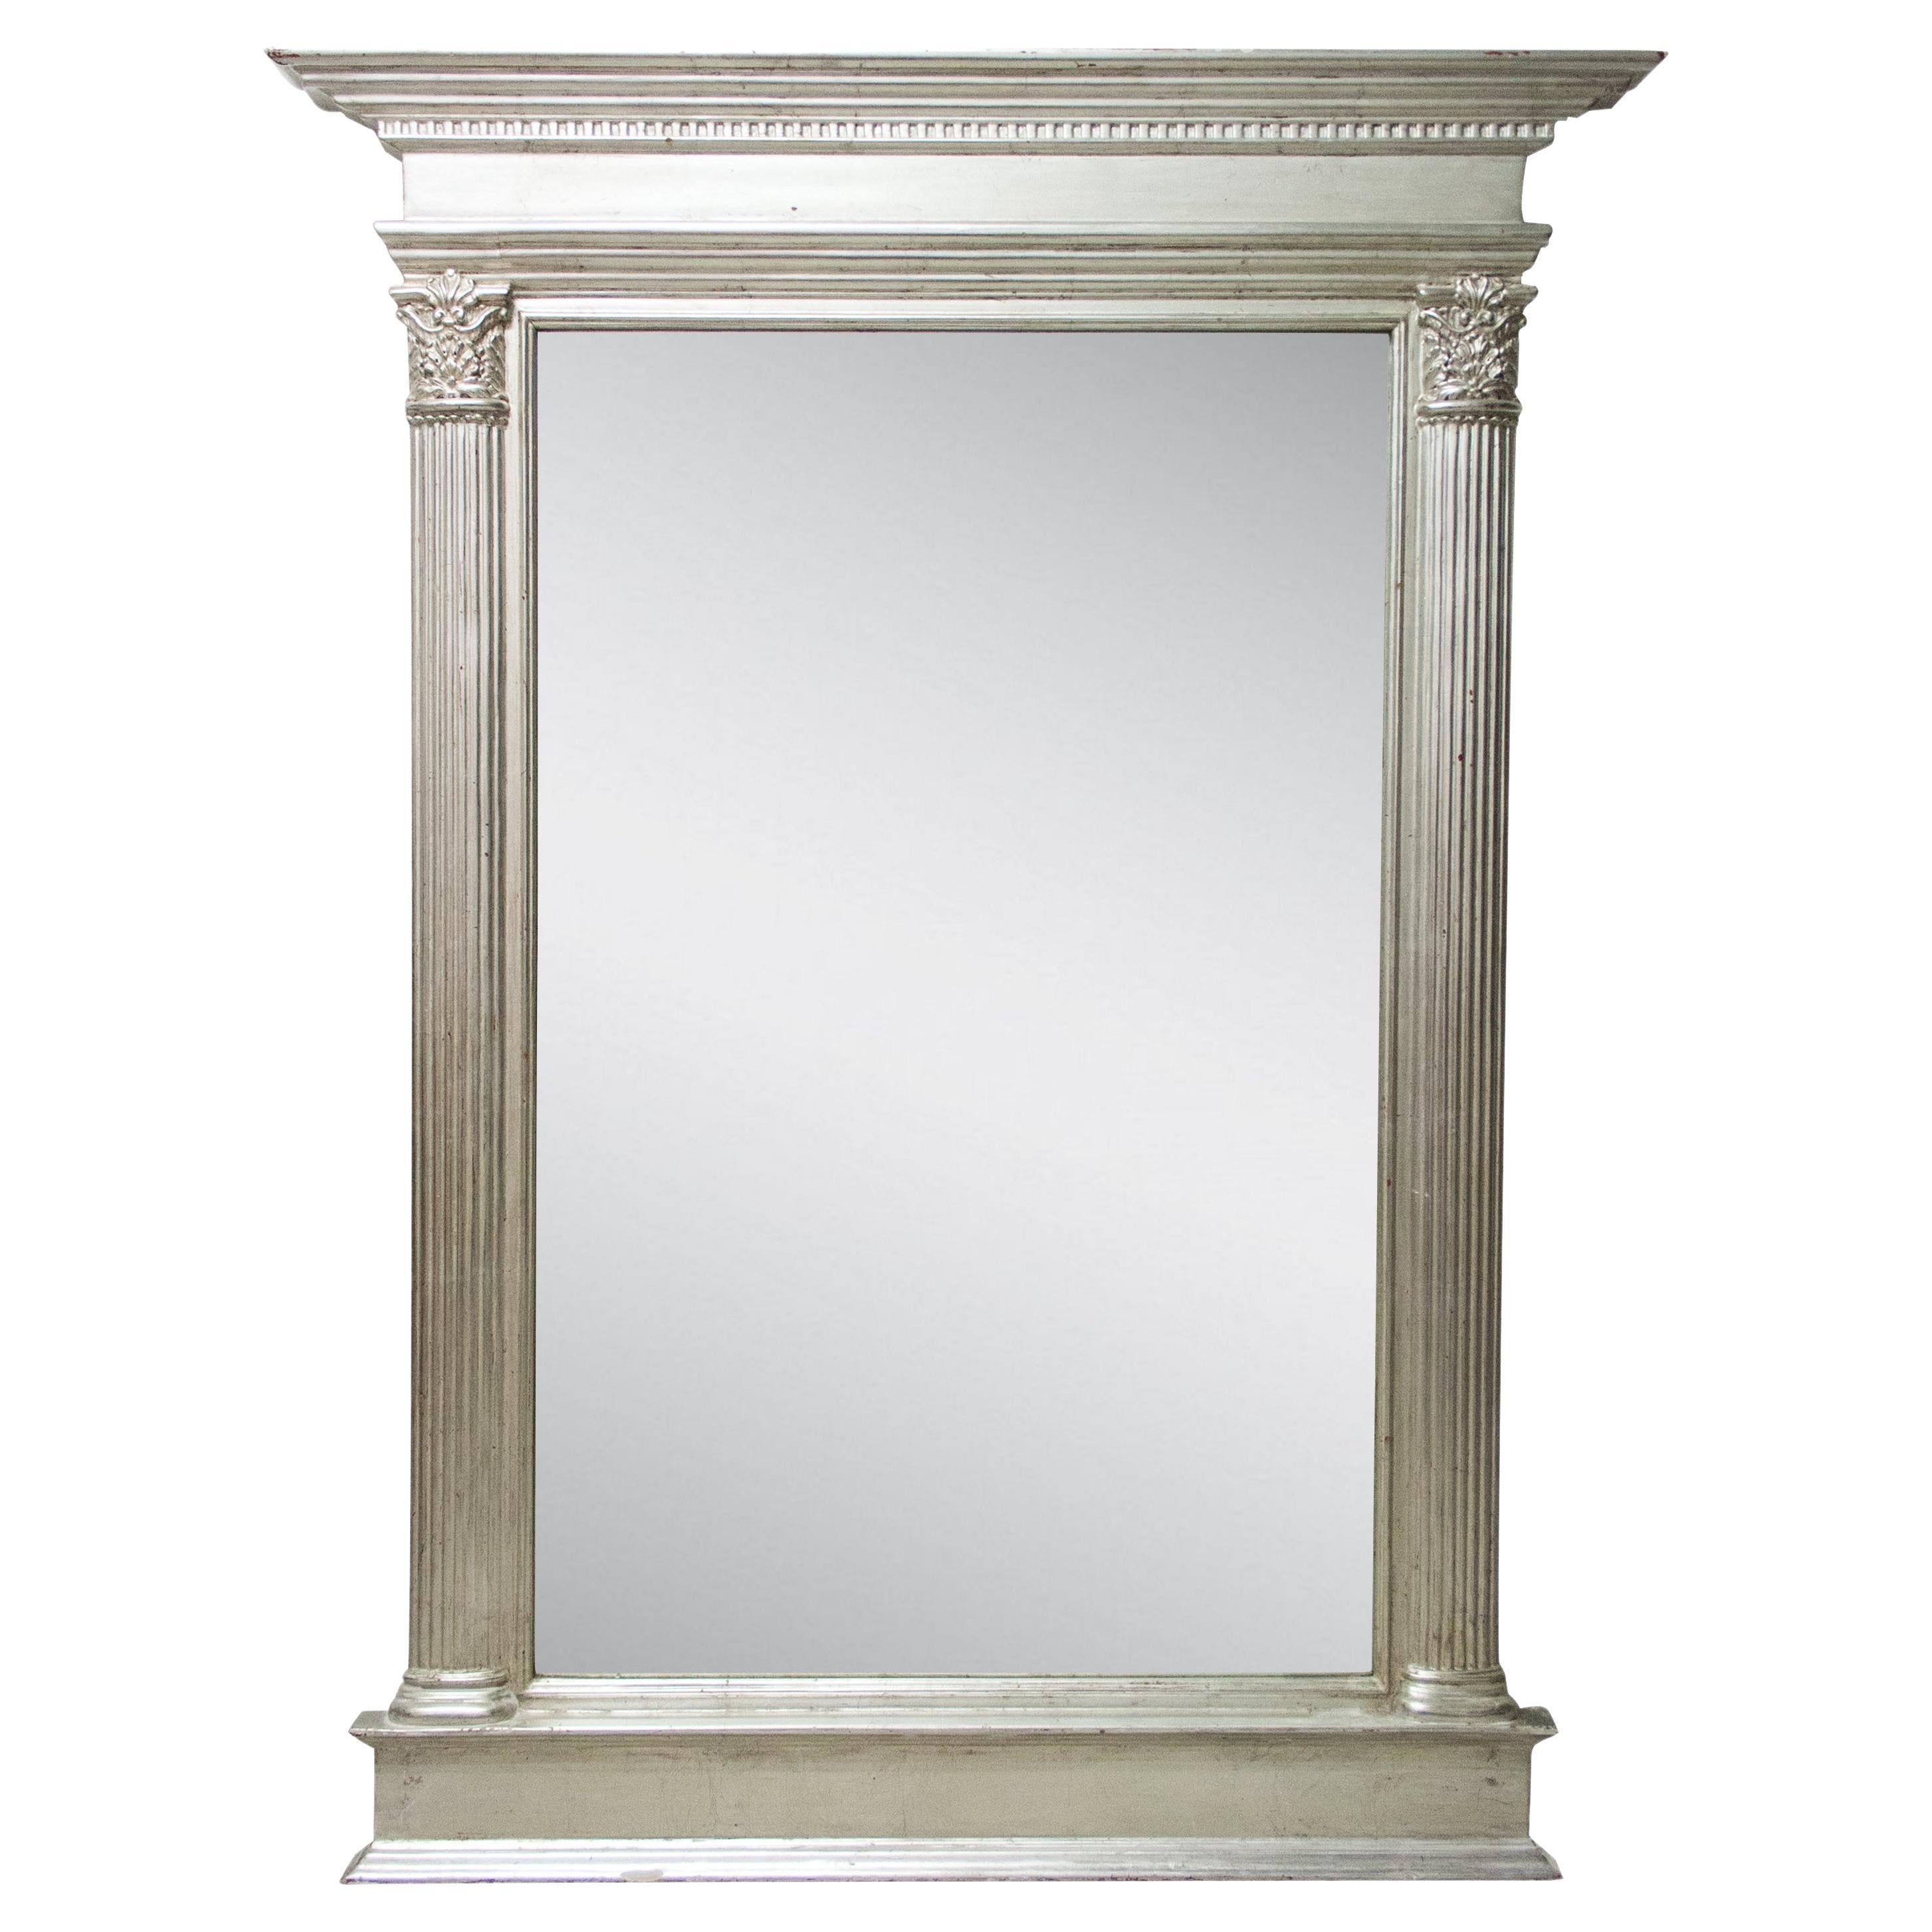 Neoclassical Regency Rectangular Silver Hand Carved Wooden Mirror